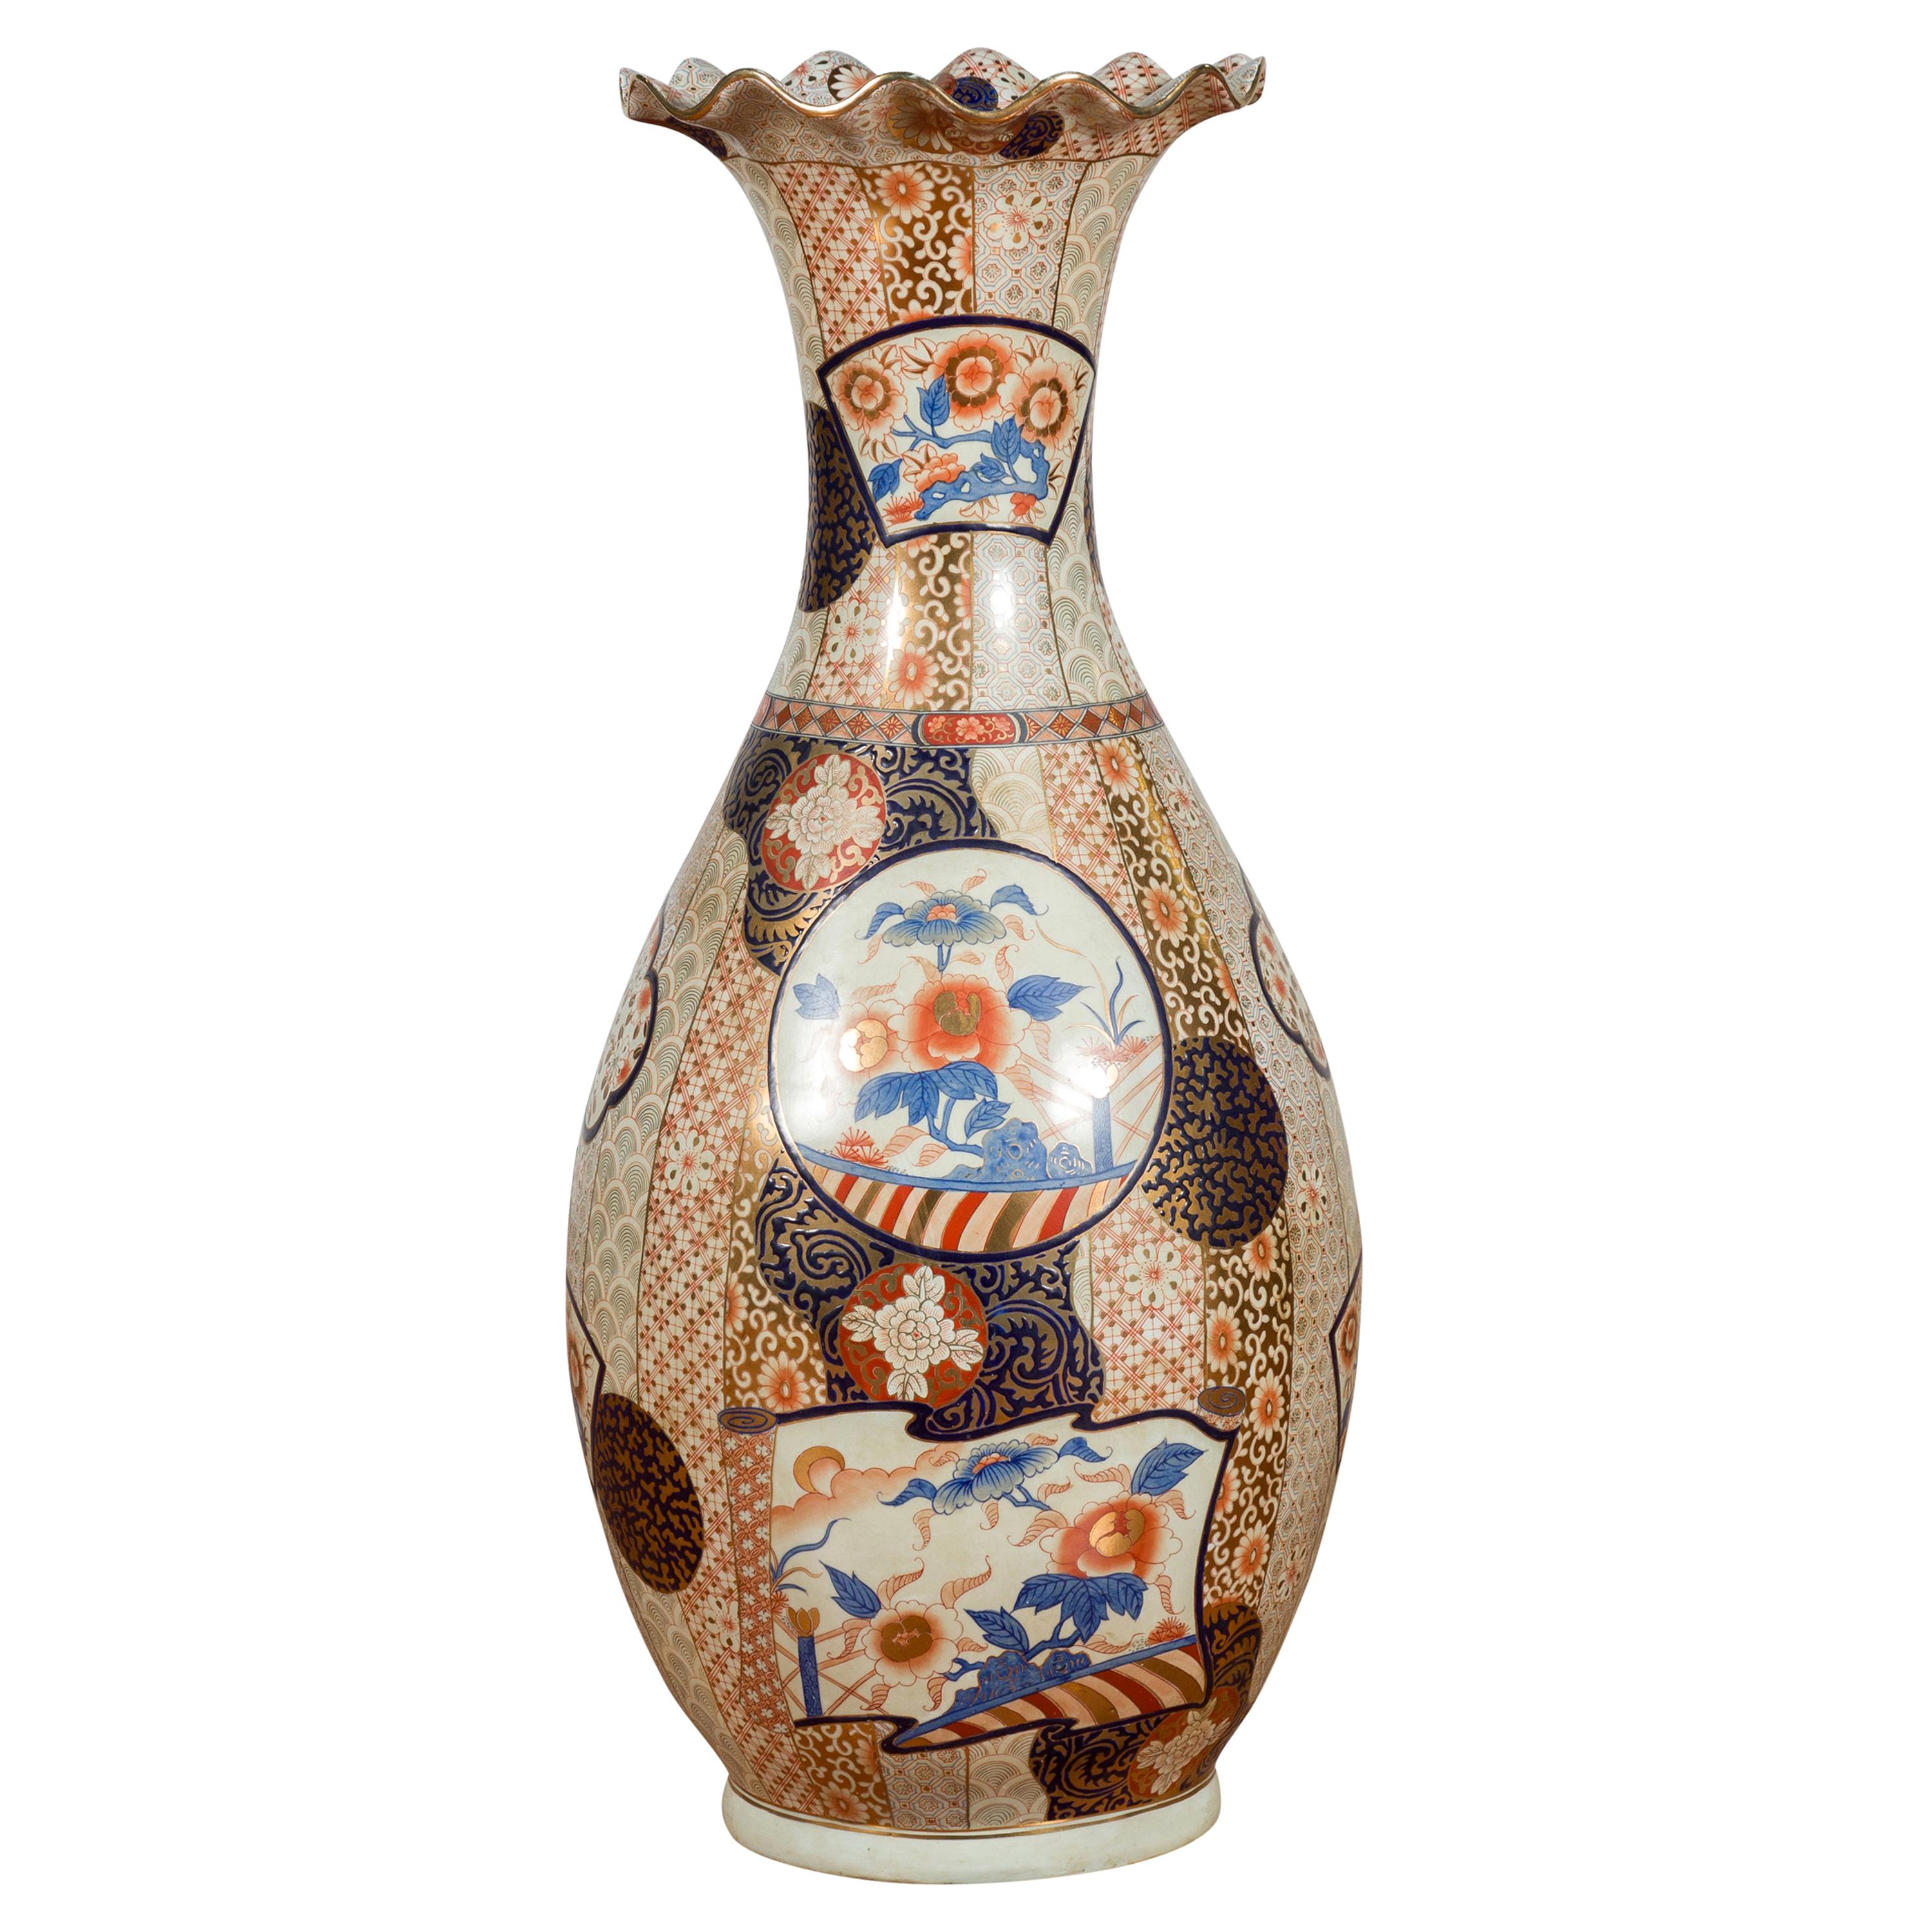 Tall Vintage Chinese Vase with Hand Painted Blue, Orange and Gold Floral Decor